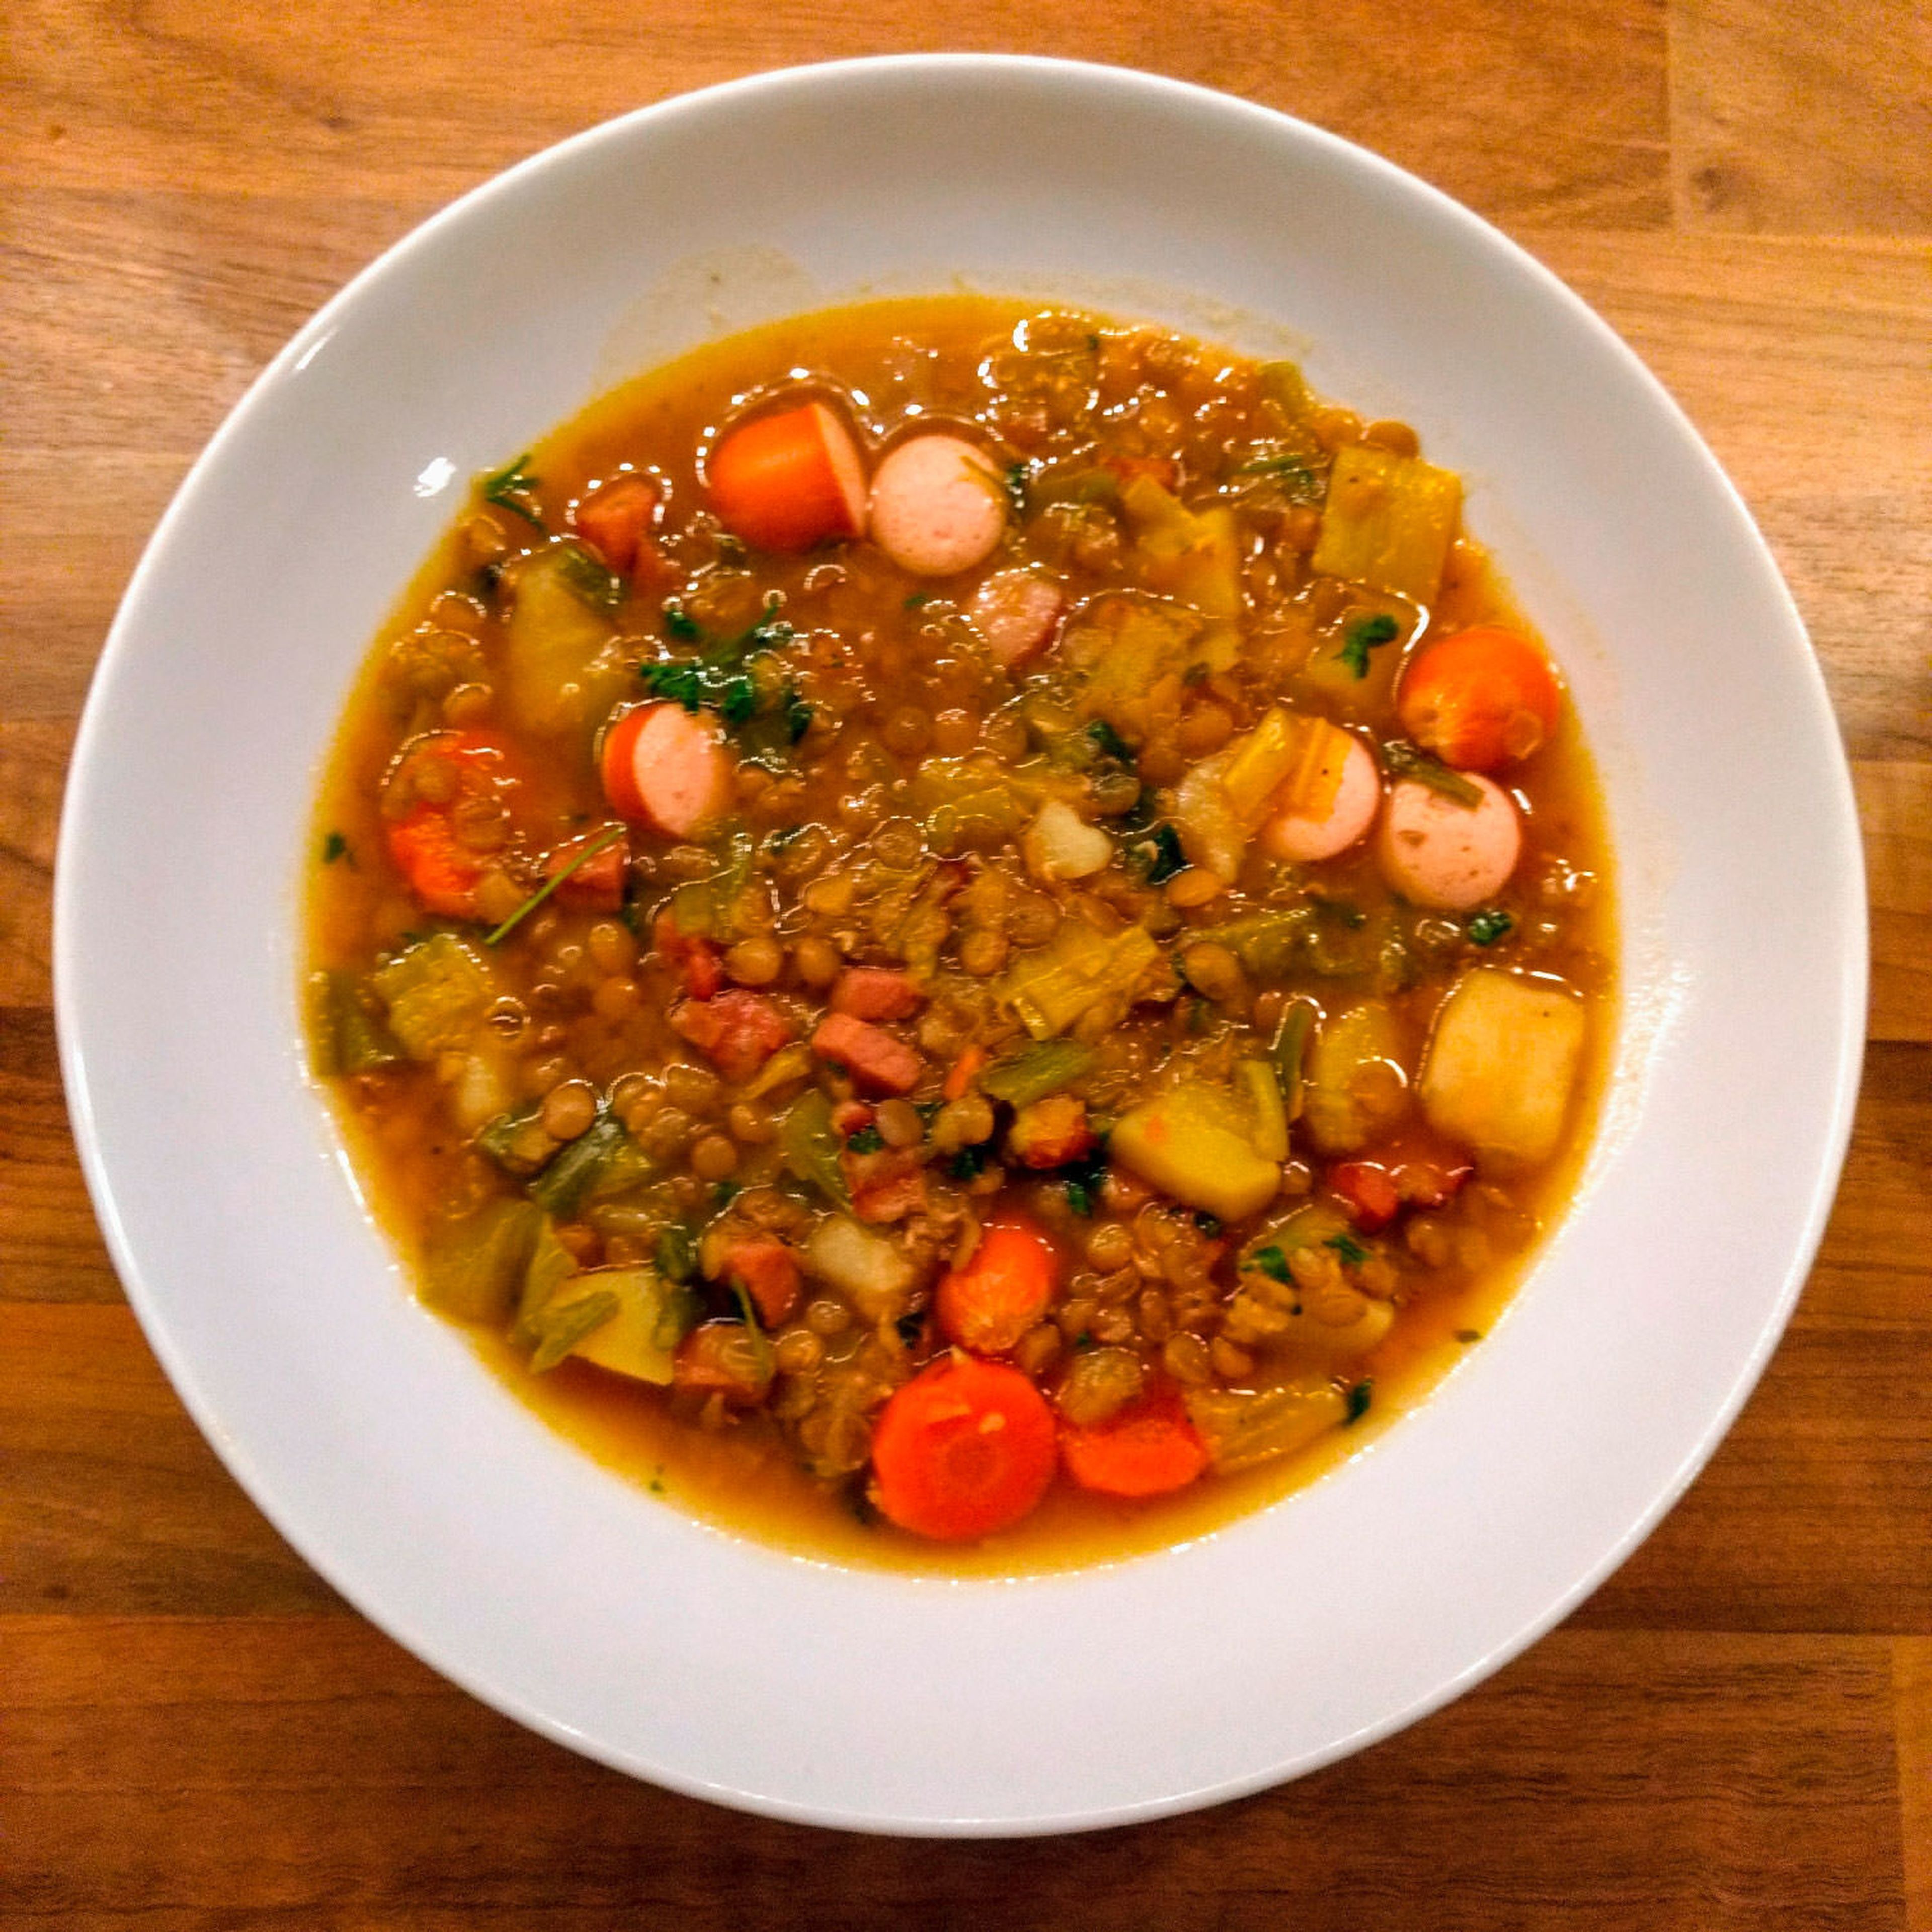 Lentil stew with sausages